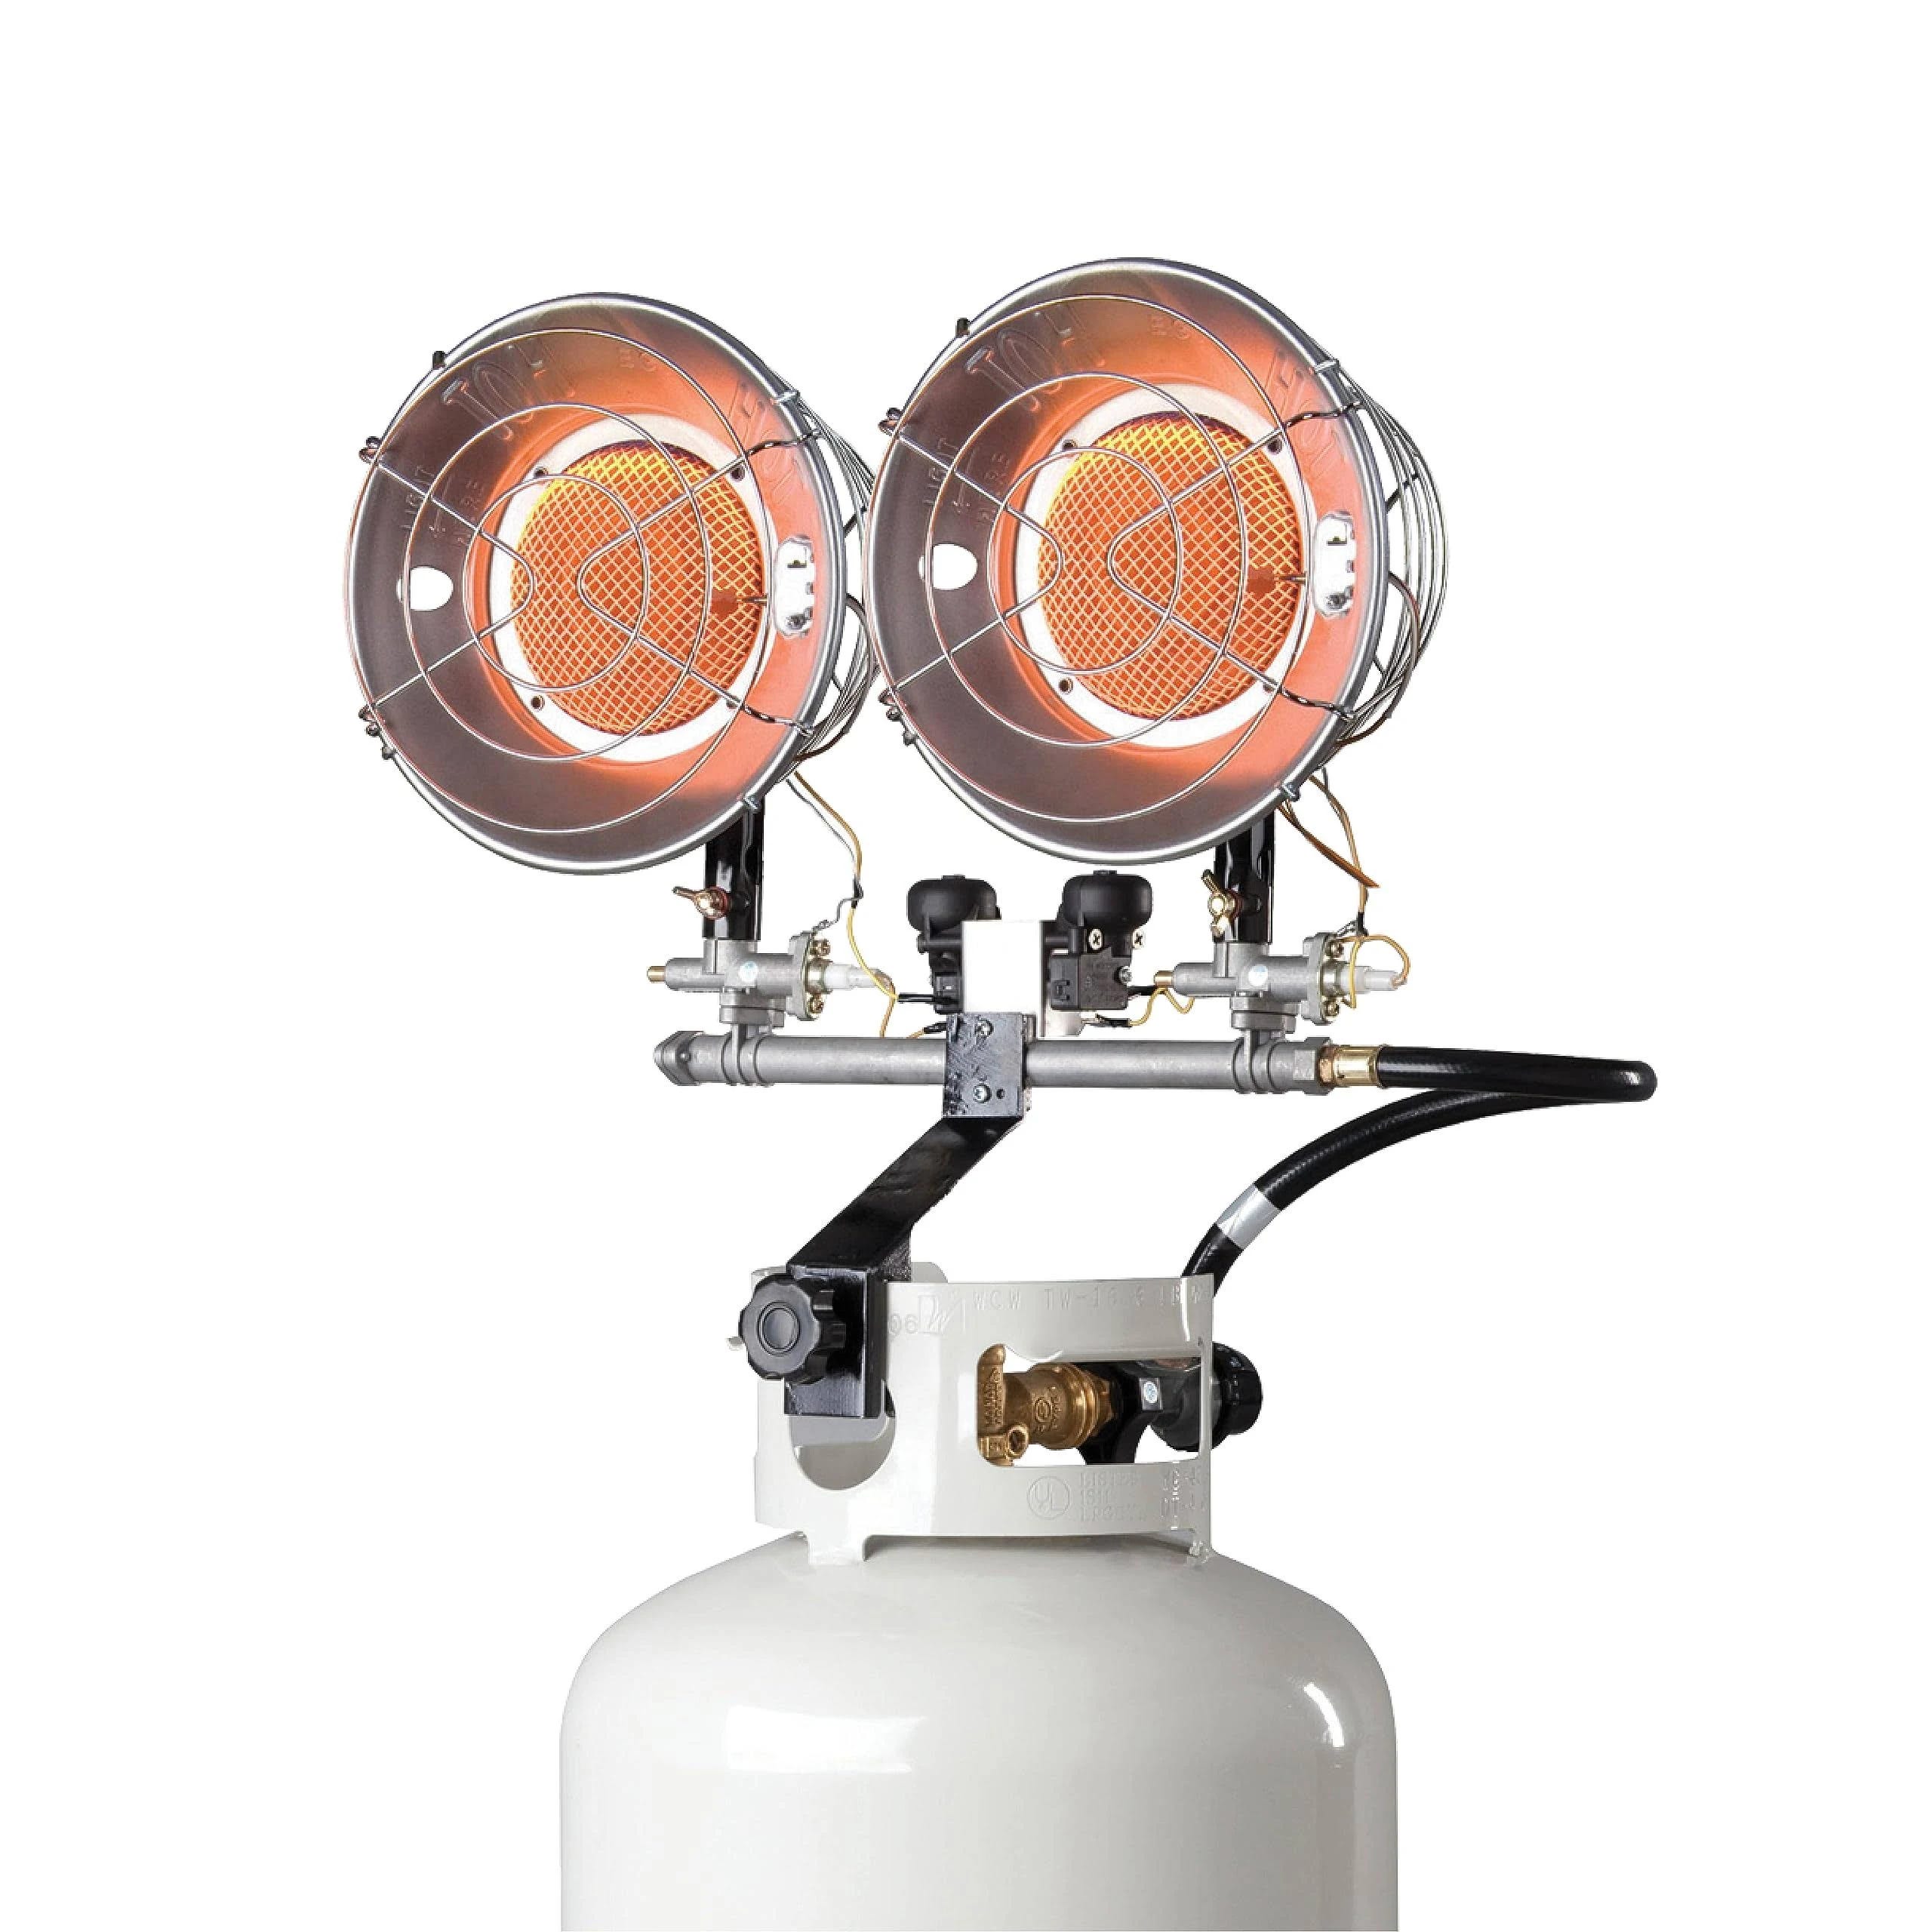 Powerful, Portable Propane Heater for Outdoor Use | Image